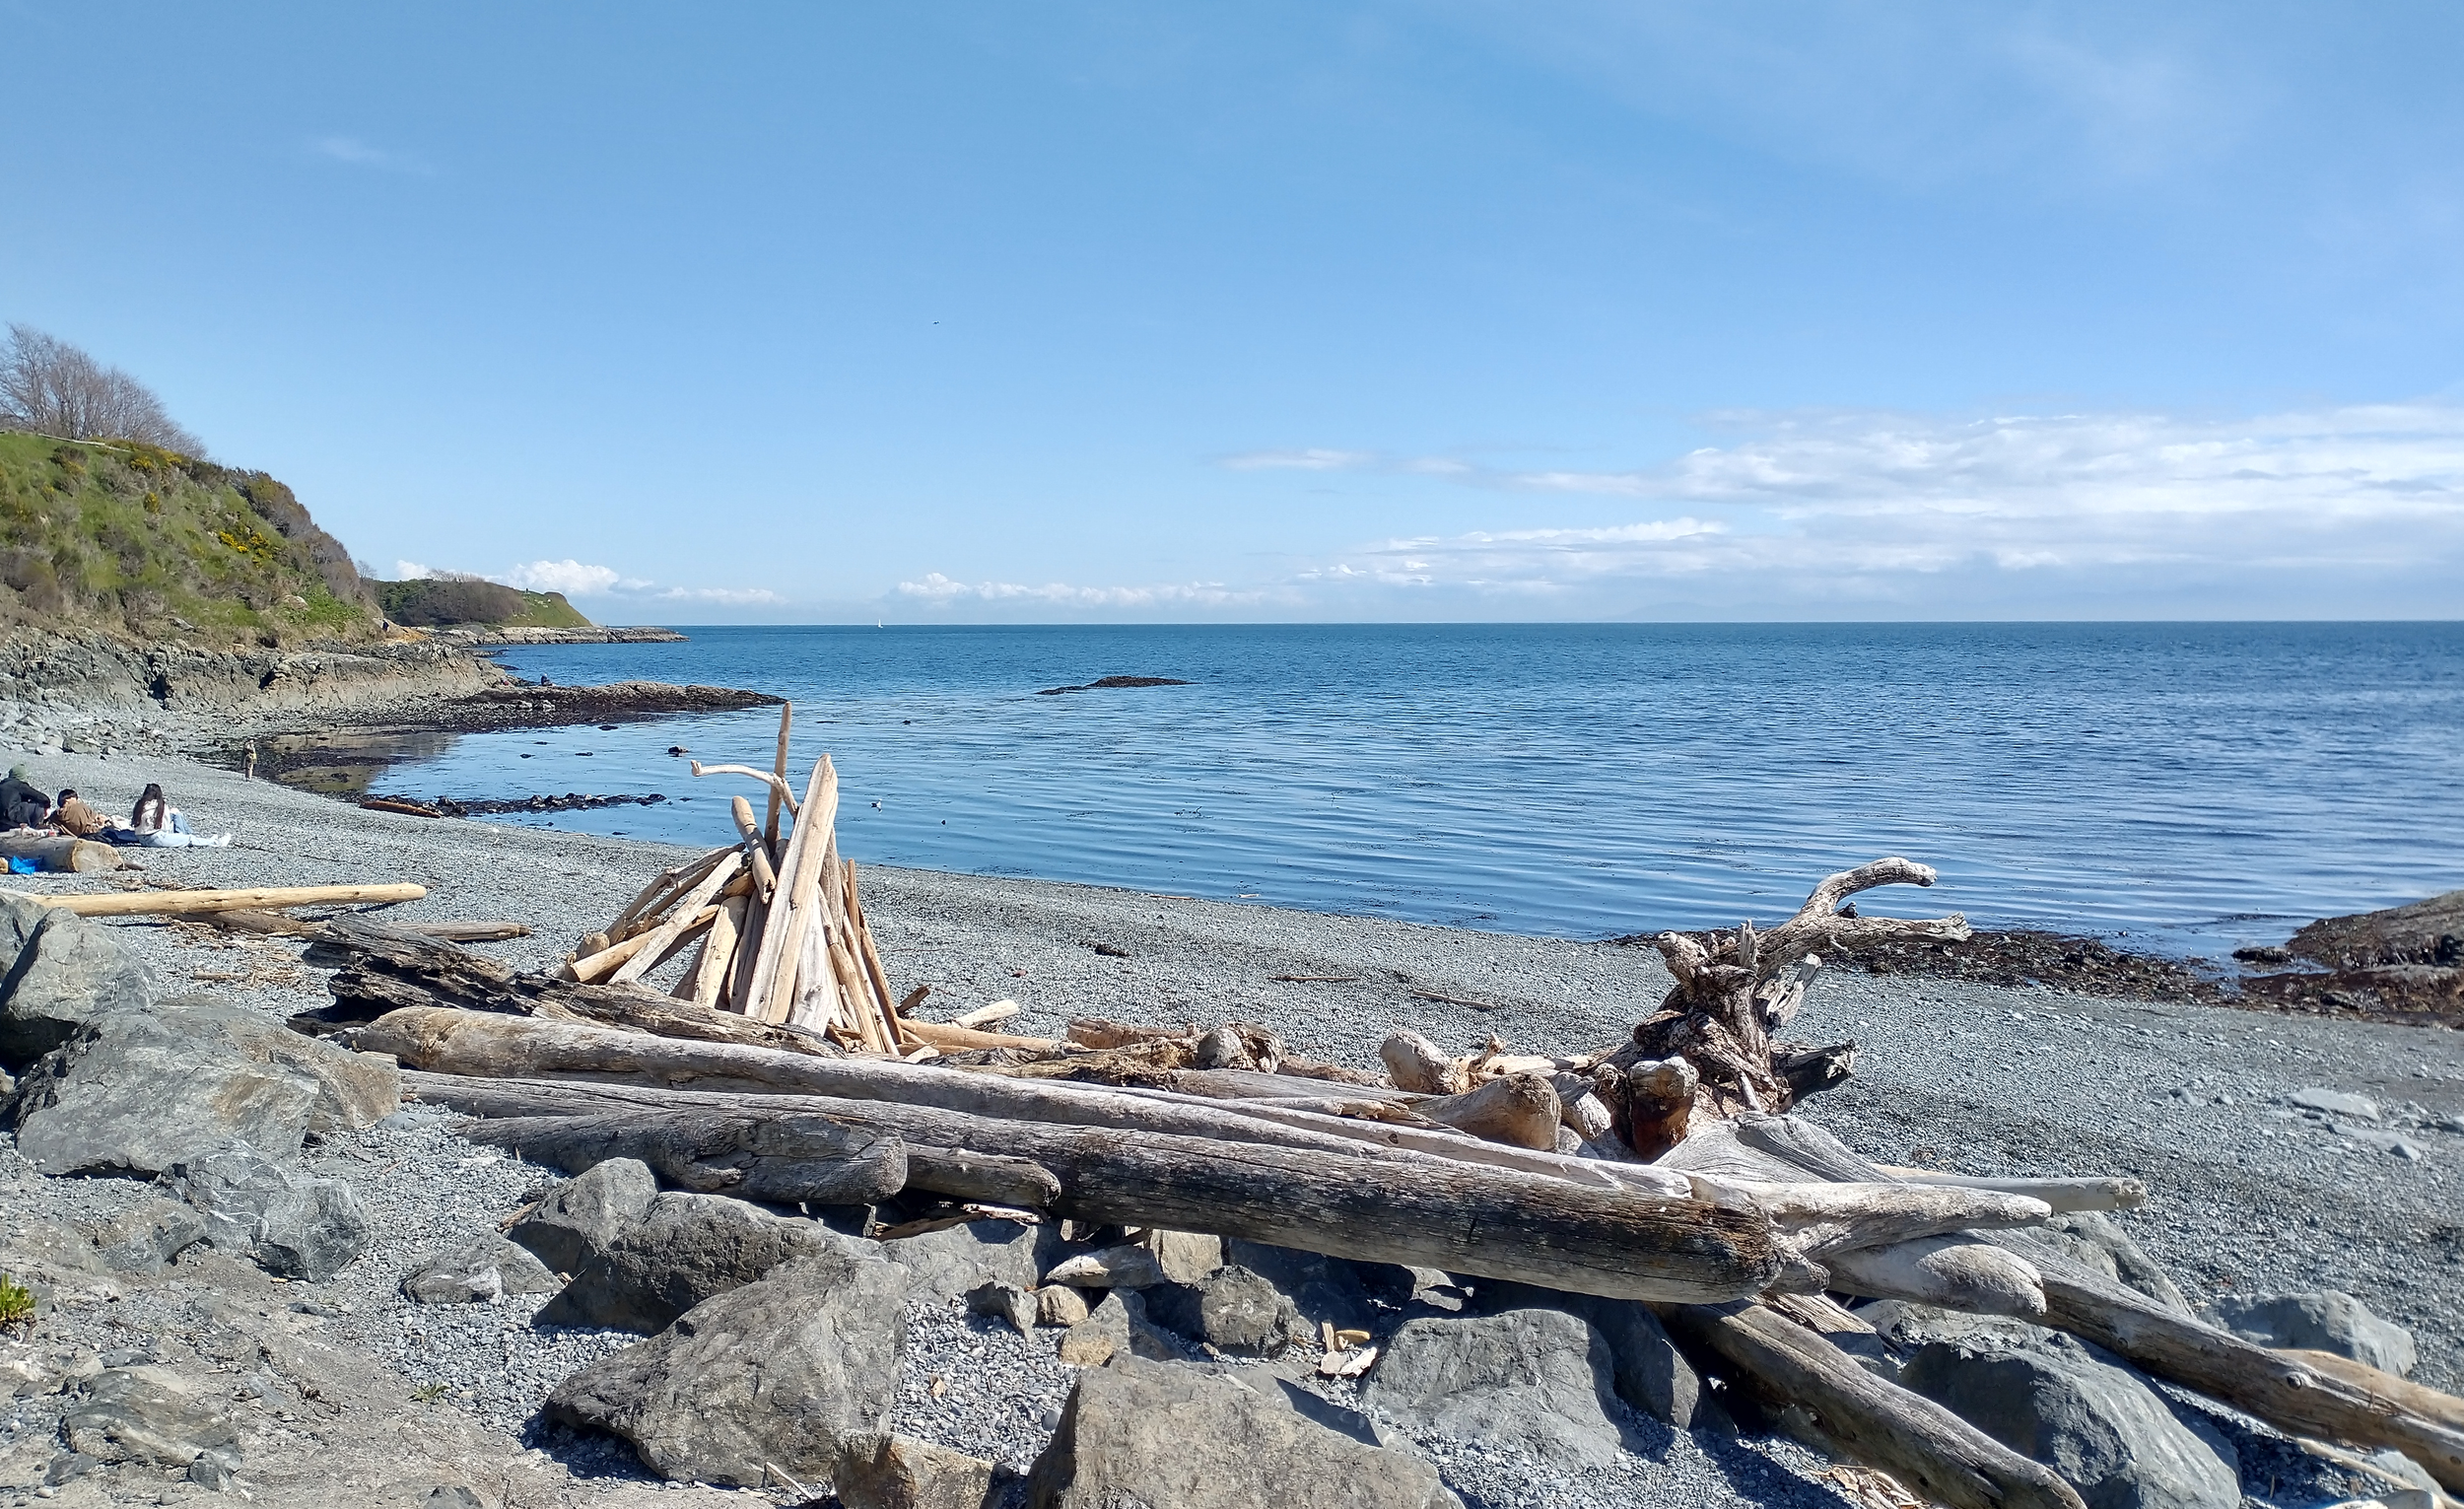  You’ll get acquainted with Vancouver Island’s typical beach: Frigid water, jagged sea debris and pebbles, no sand and tons of driftwood. The views are always amazing though. Dog walking seems to be the most popular activity to do on these beaches. 